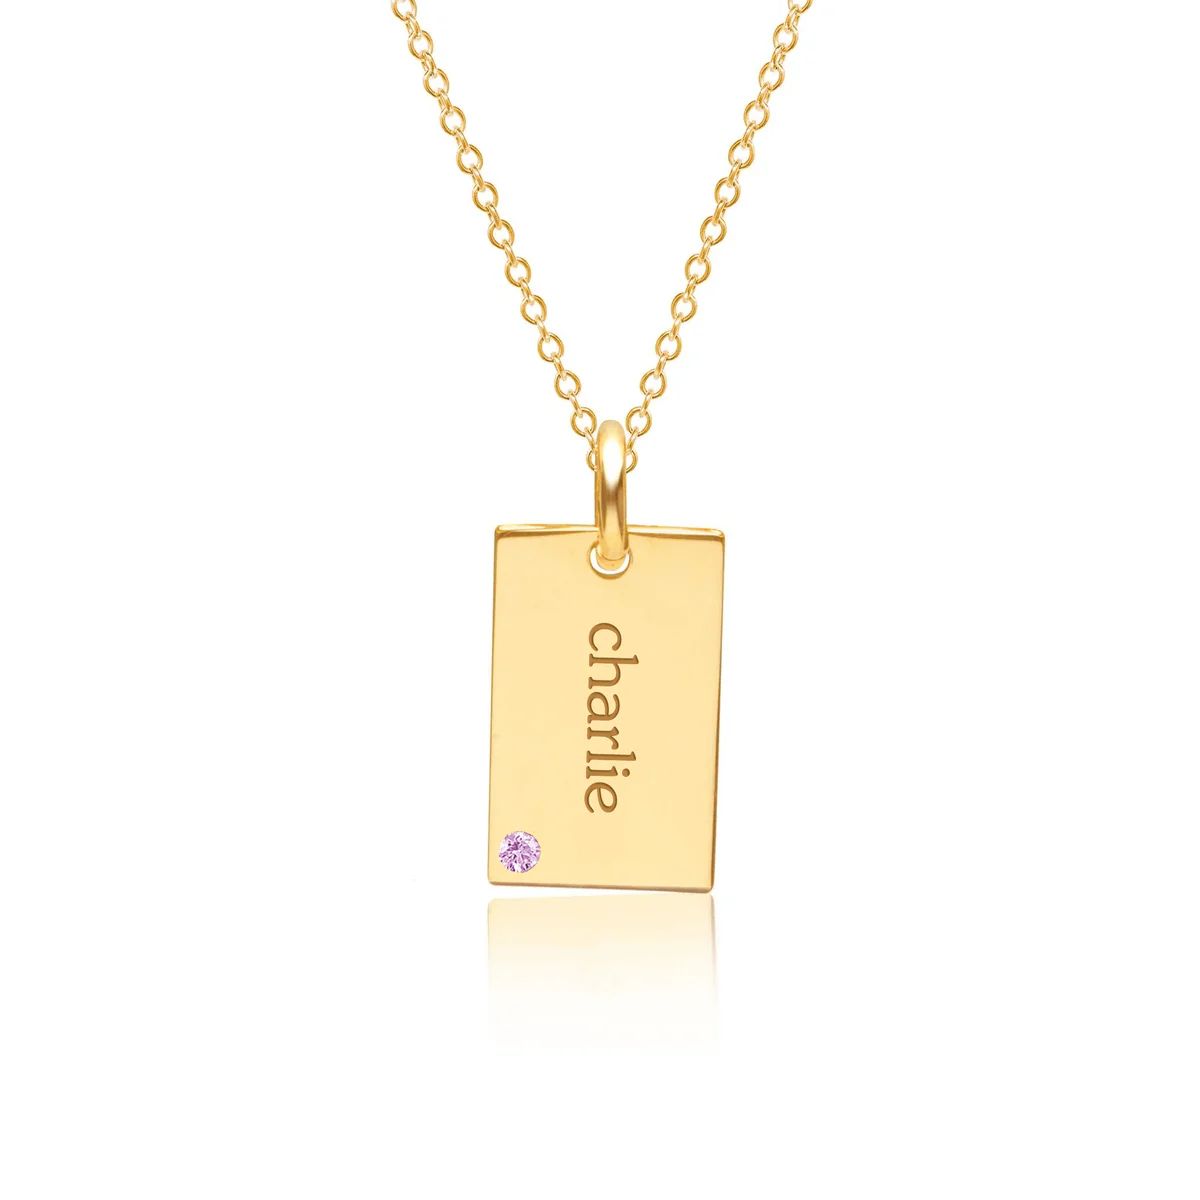 Gold Mini Dog Tag Necklace with Birthstone | Tiny Tags